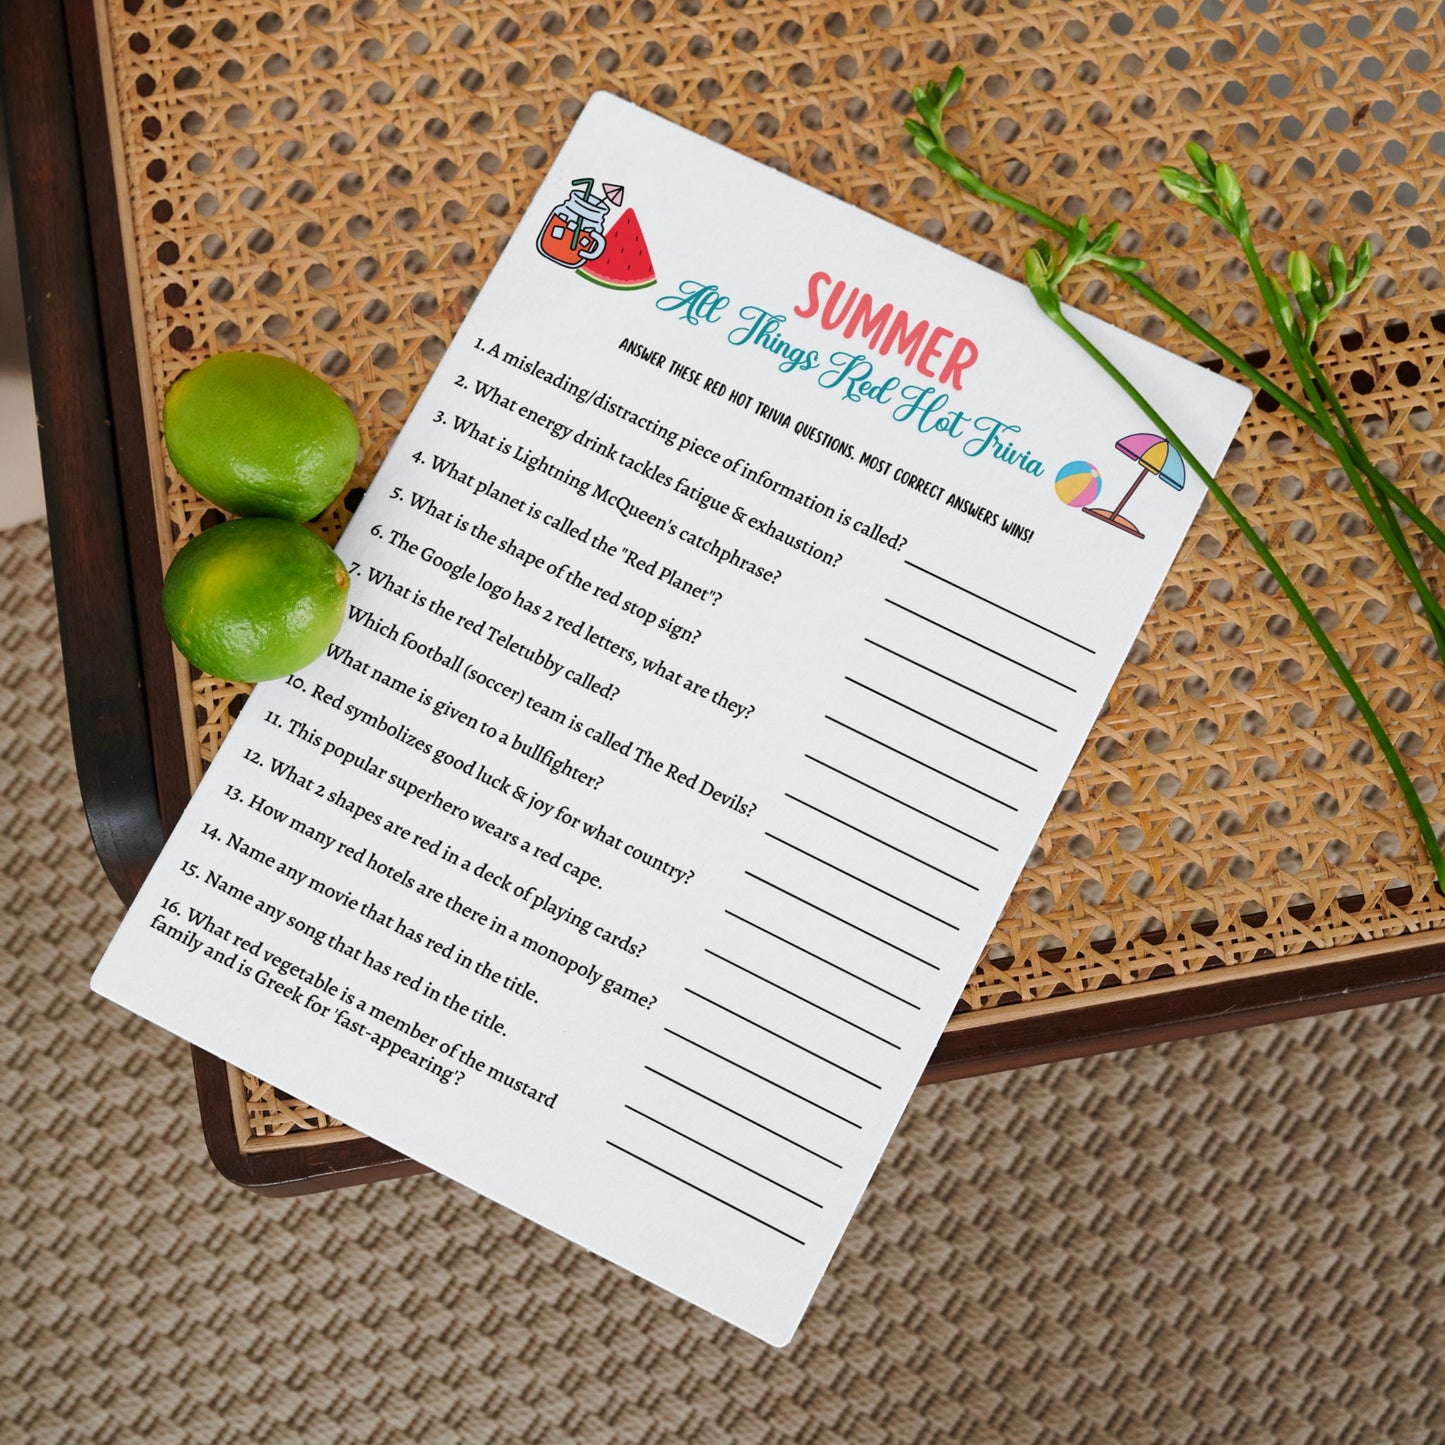 Summer Trivia Game Printable, Pool Party Games, Summer Camp Fact or Fiction Activity, Fun Beach Games for Kids, Summer Break Vacation Ideas